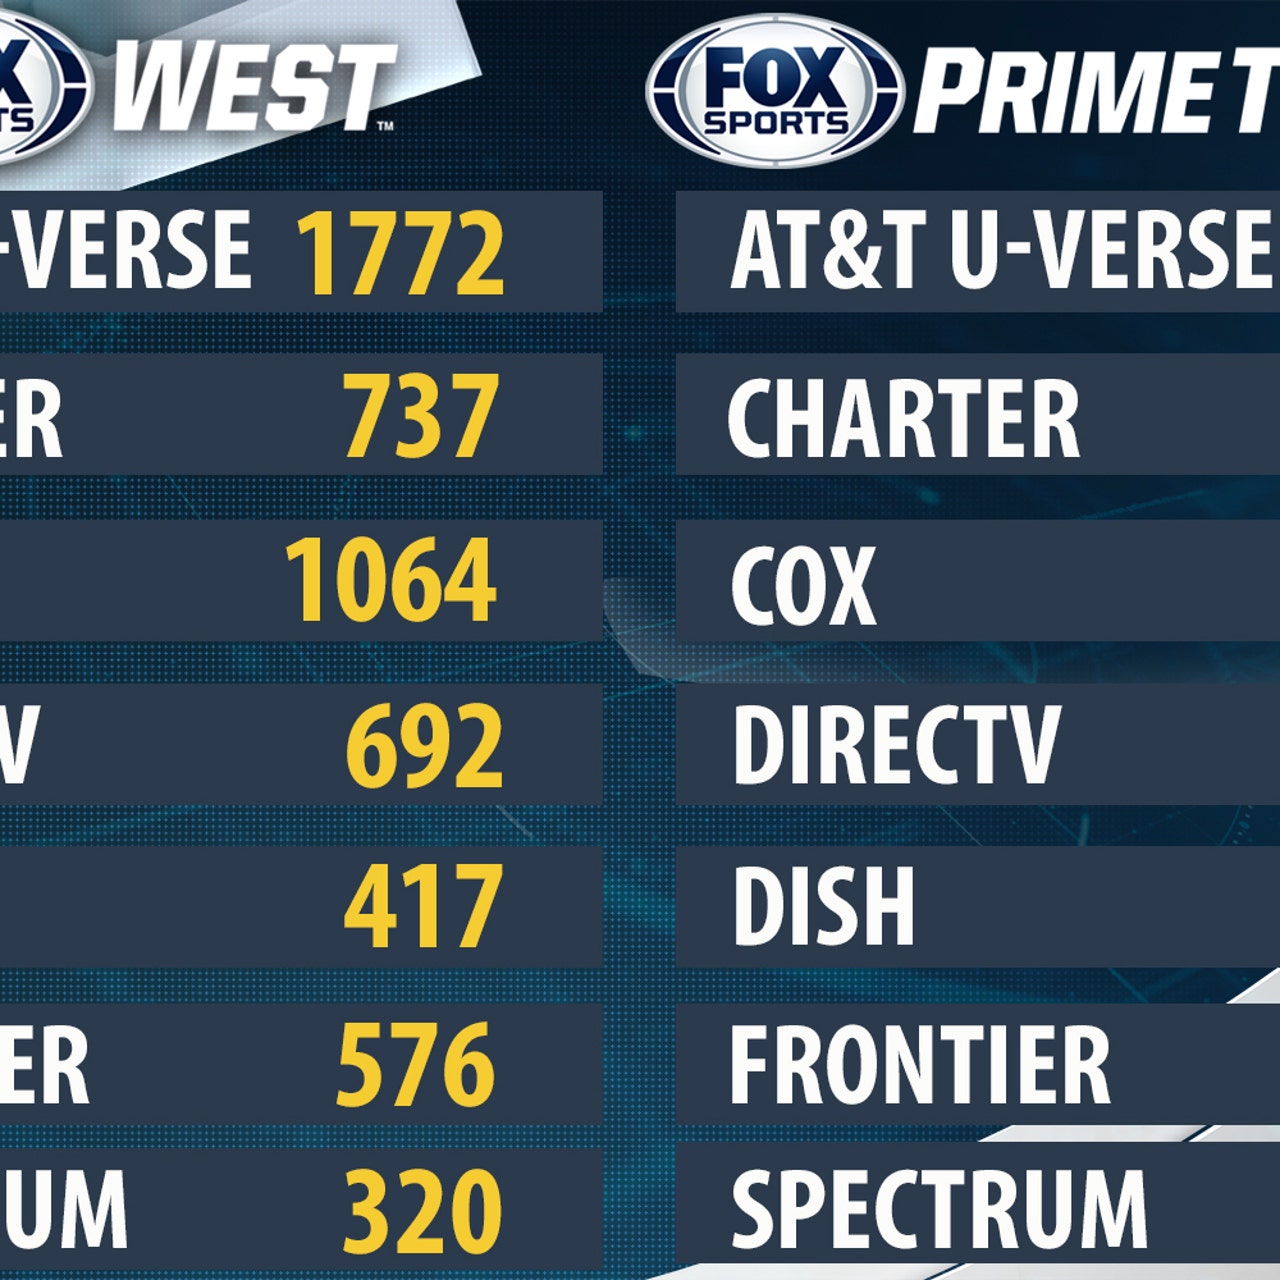 Channel listings for FOX Sports West and Prime Ticket FOX Sports